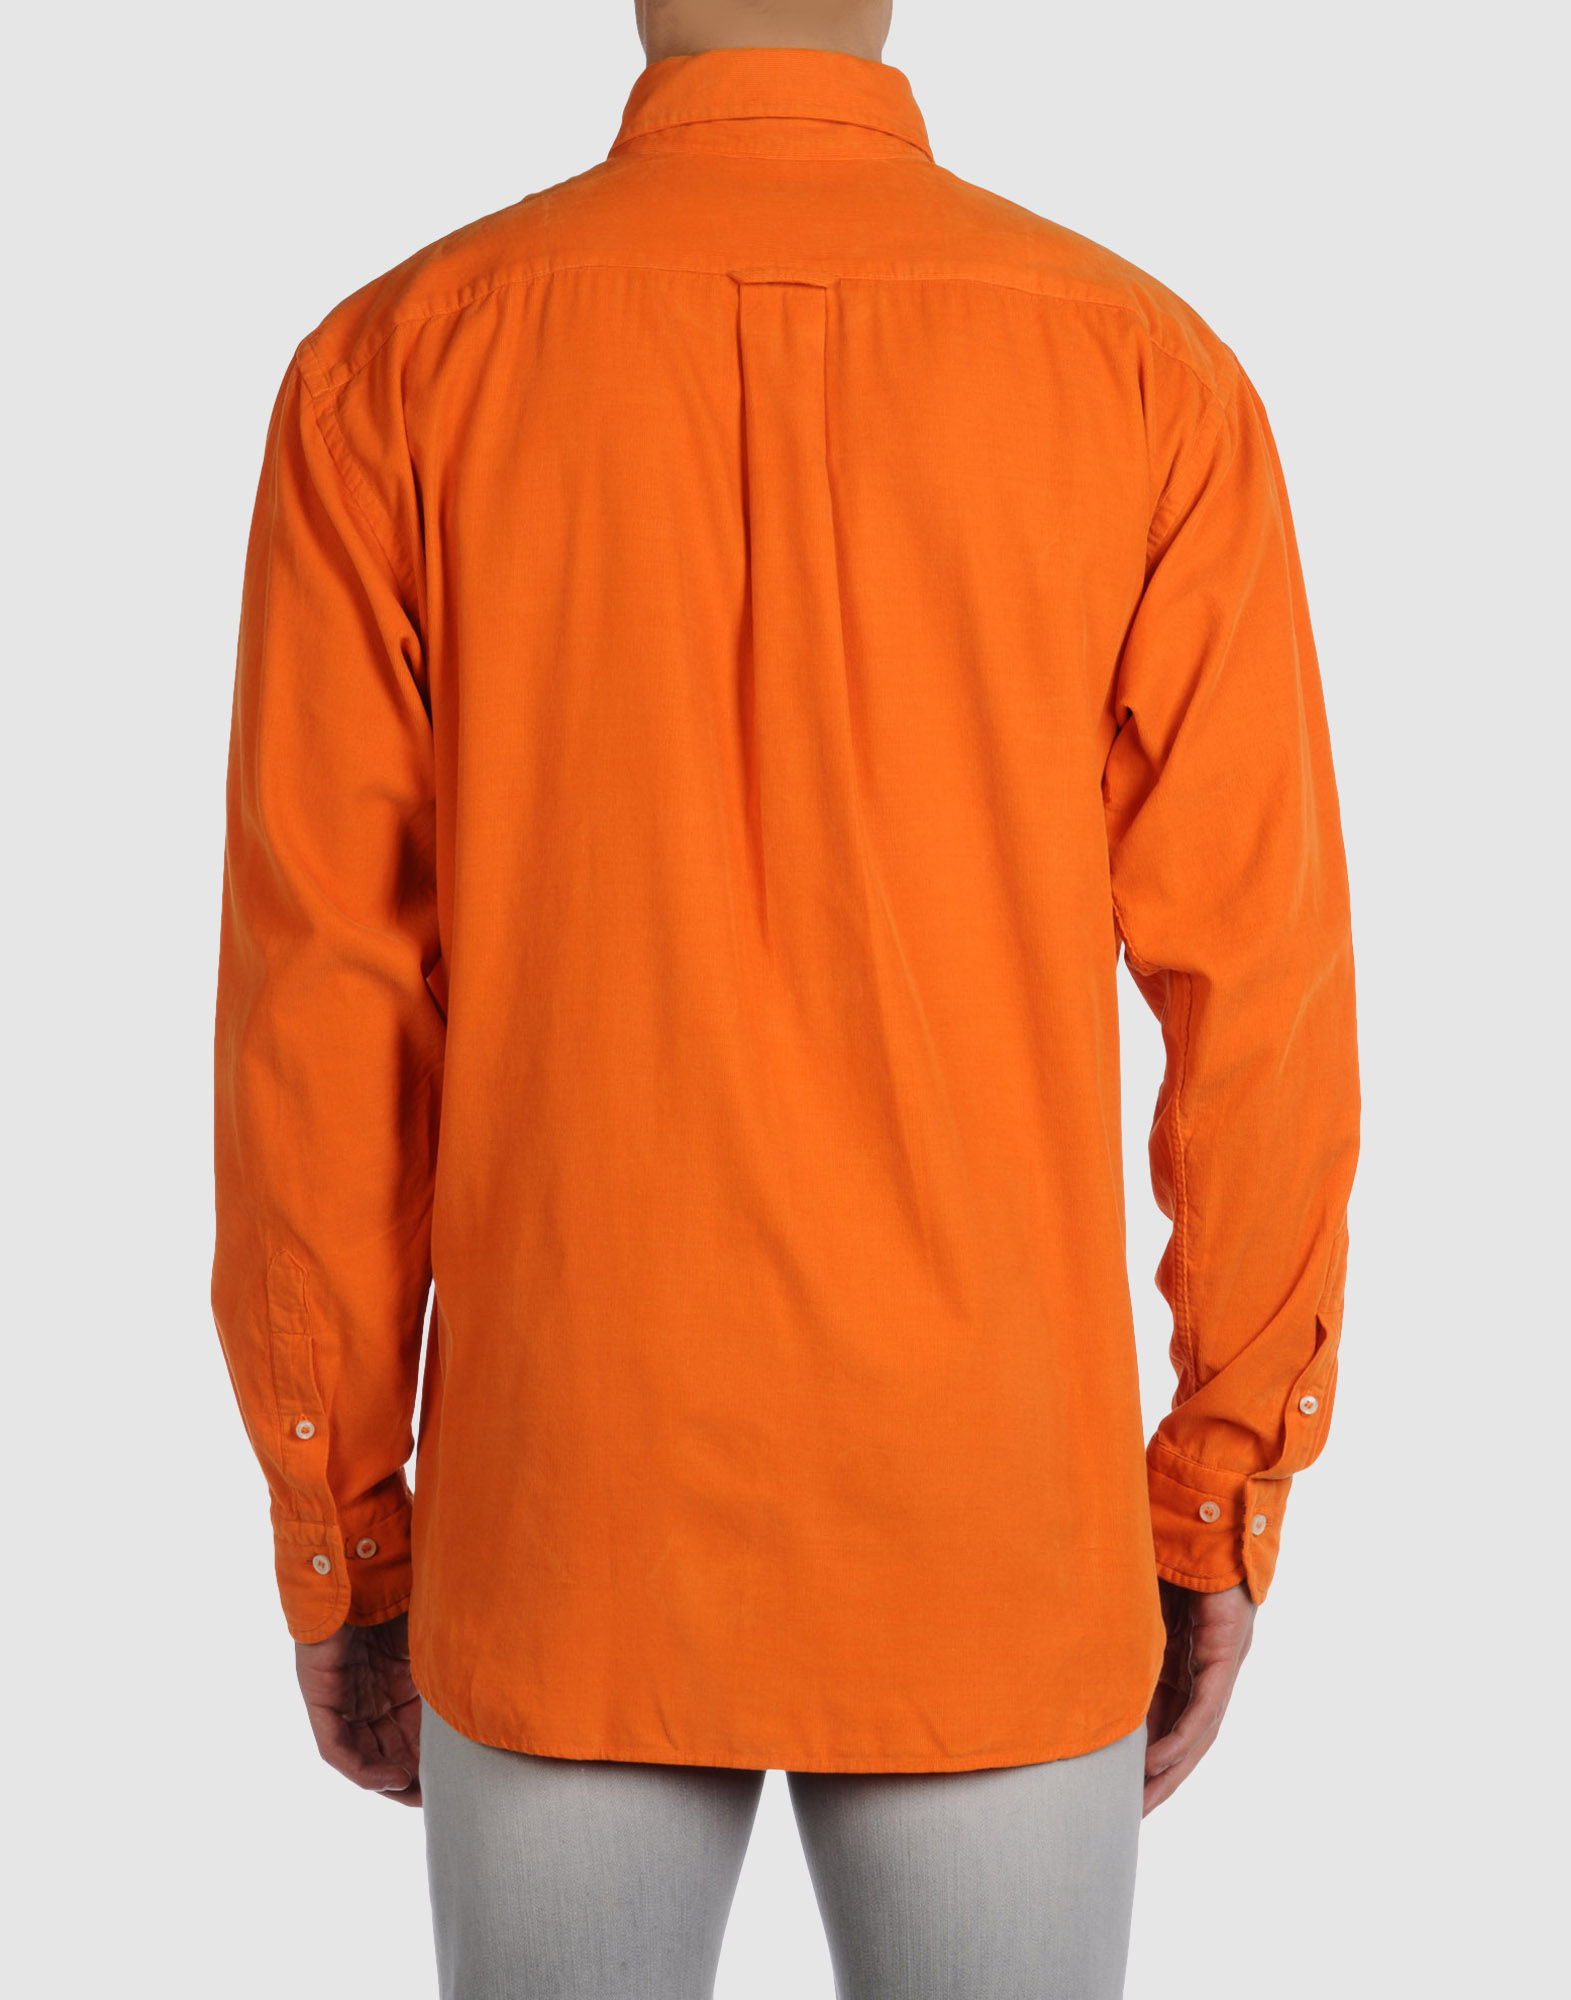 Burberry Long Sleeve Shirts in Orange for Men - Lyst